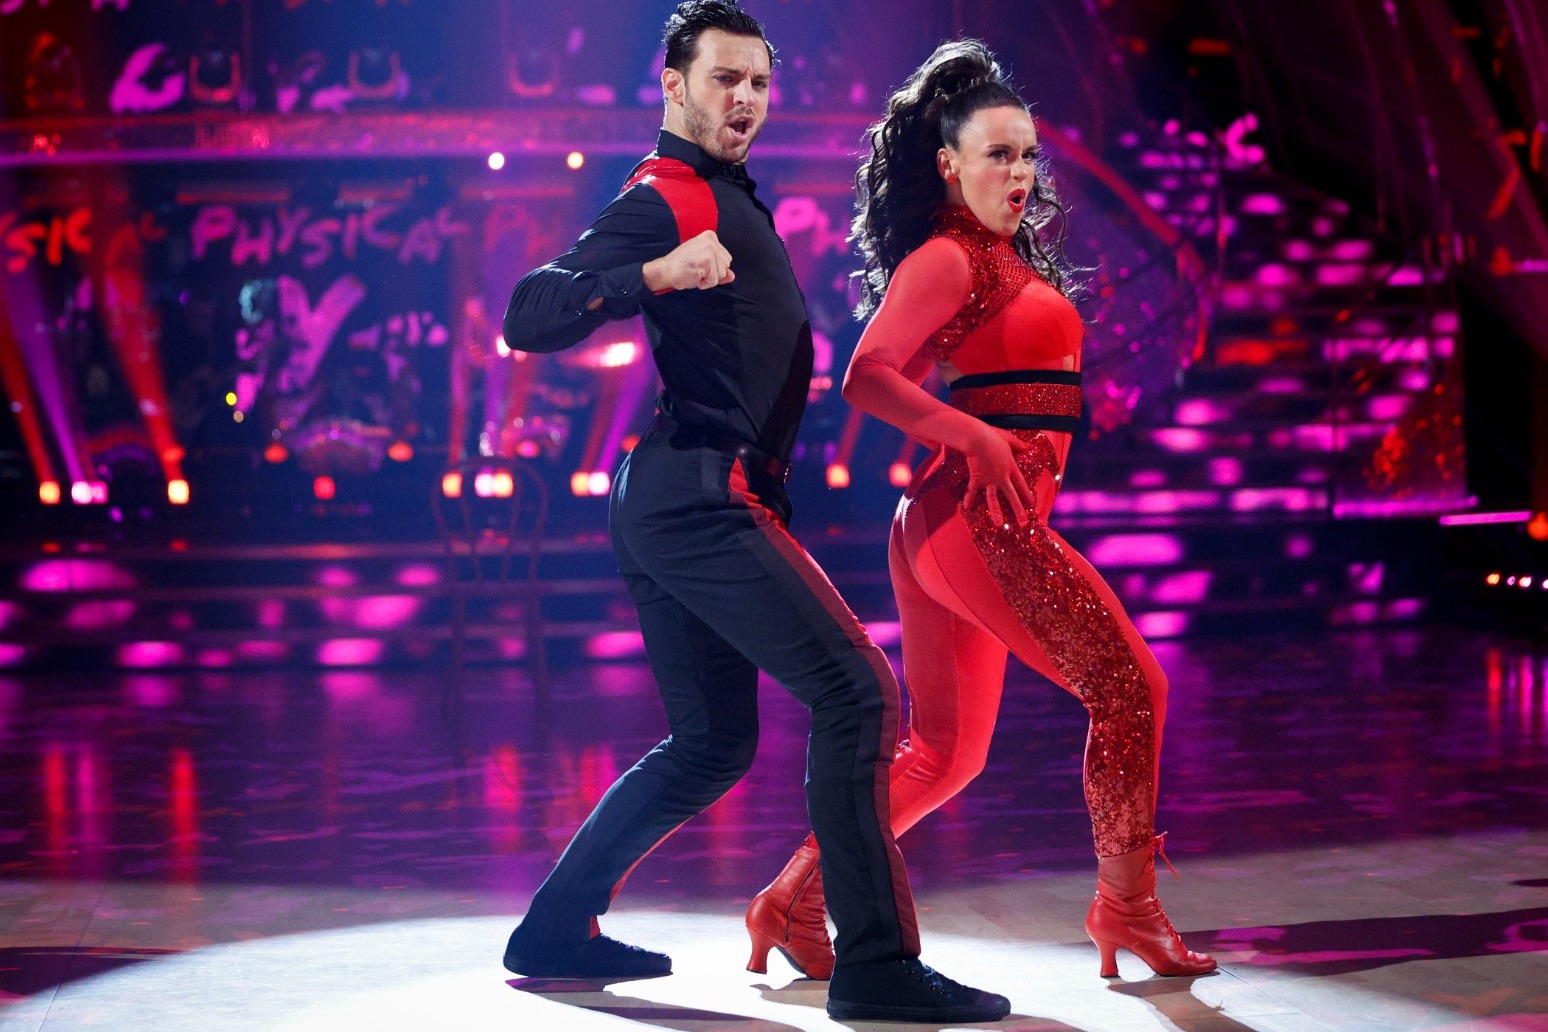 Ellie Leach says ‘I’m so much more confident in myself now’ since Strictly began 